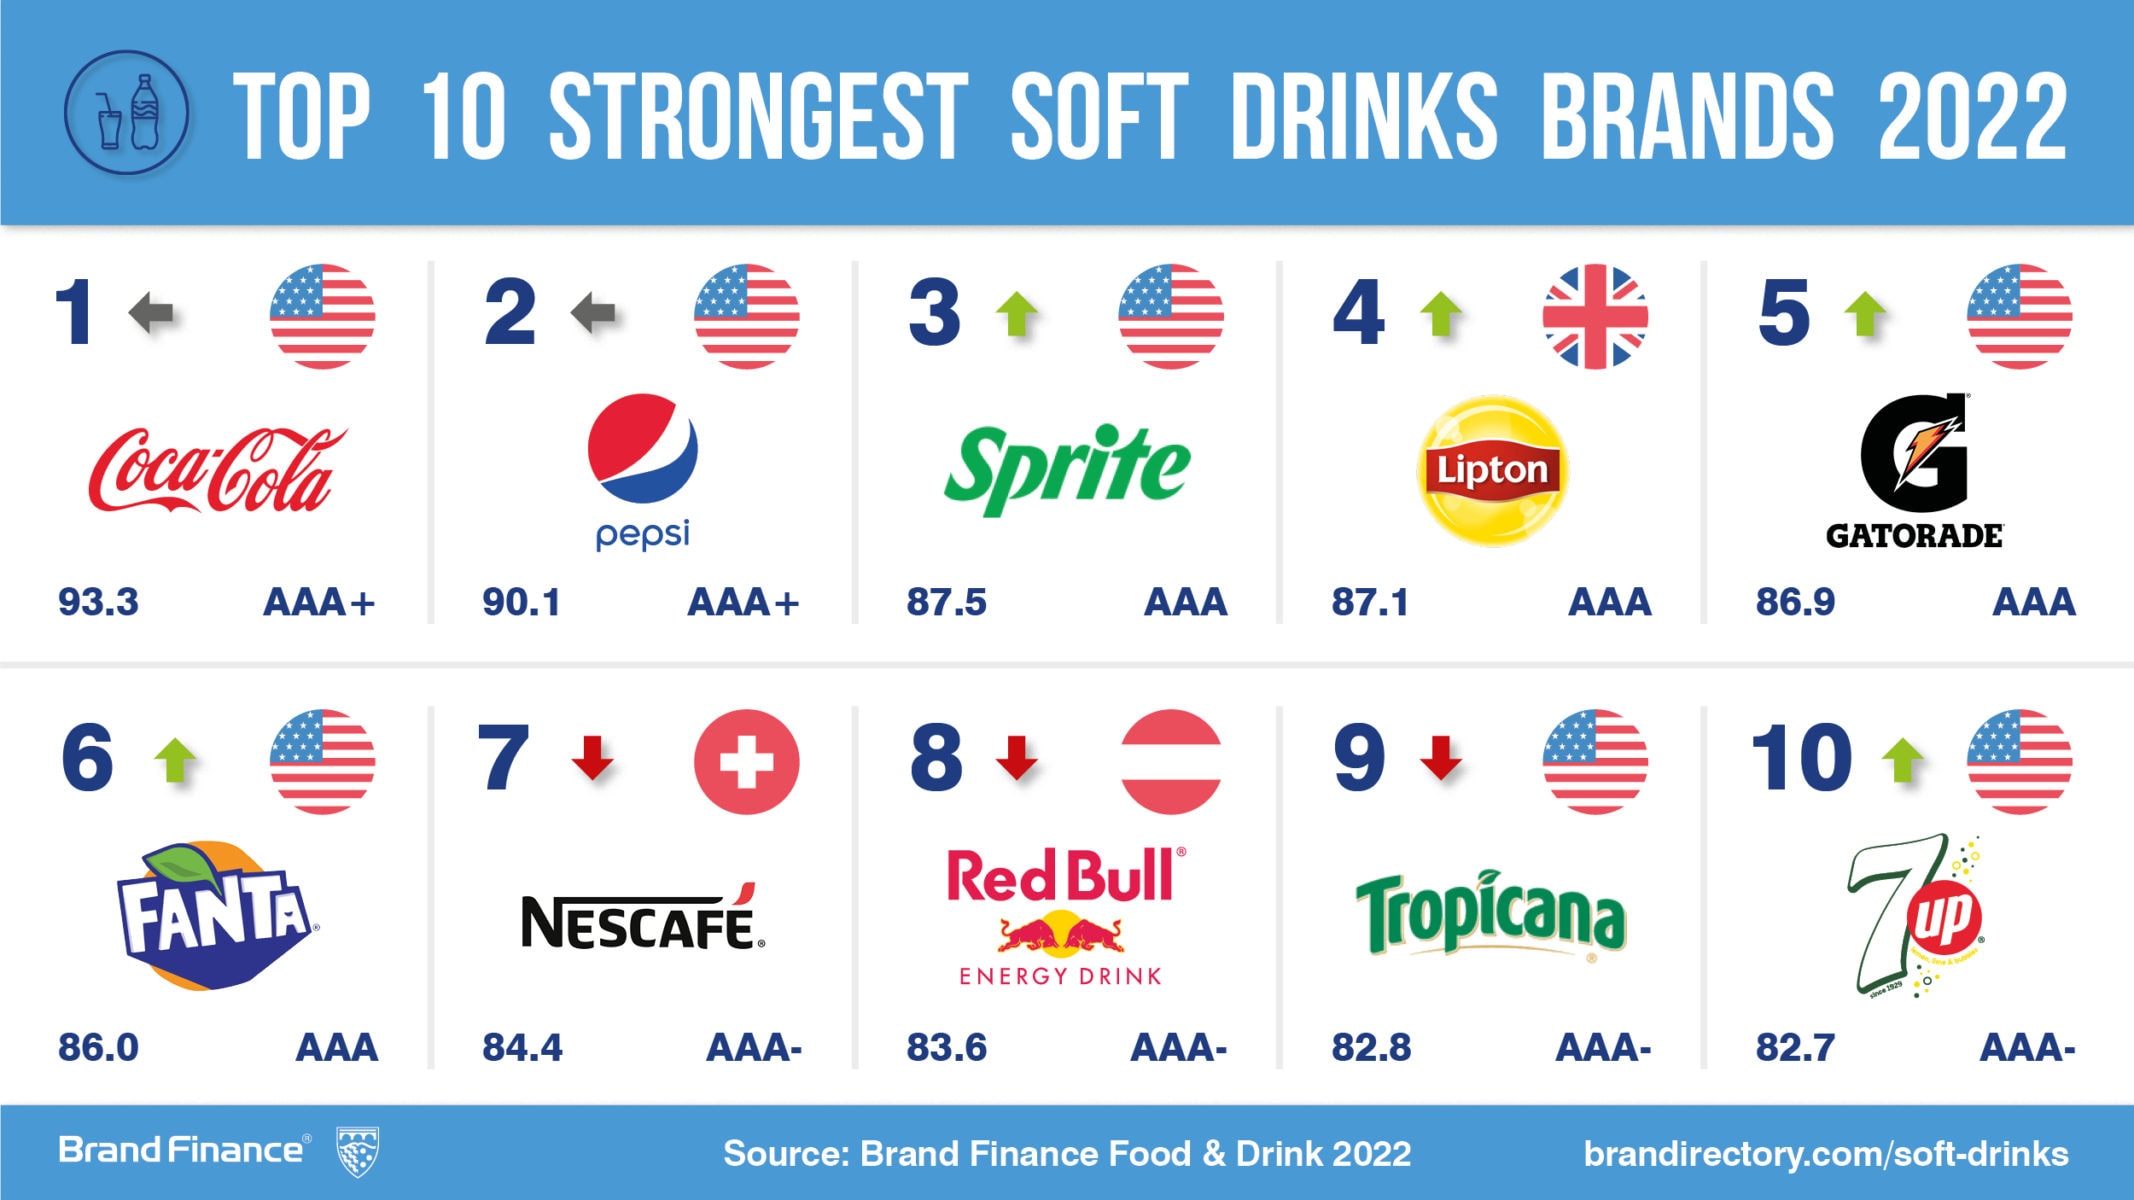 Non-alcoholic drinks brands are sparkling as the world looks to